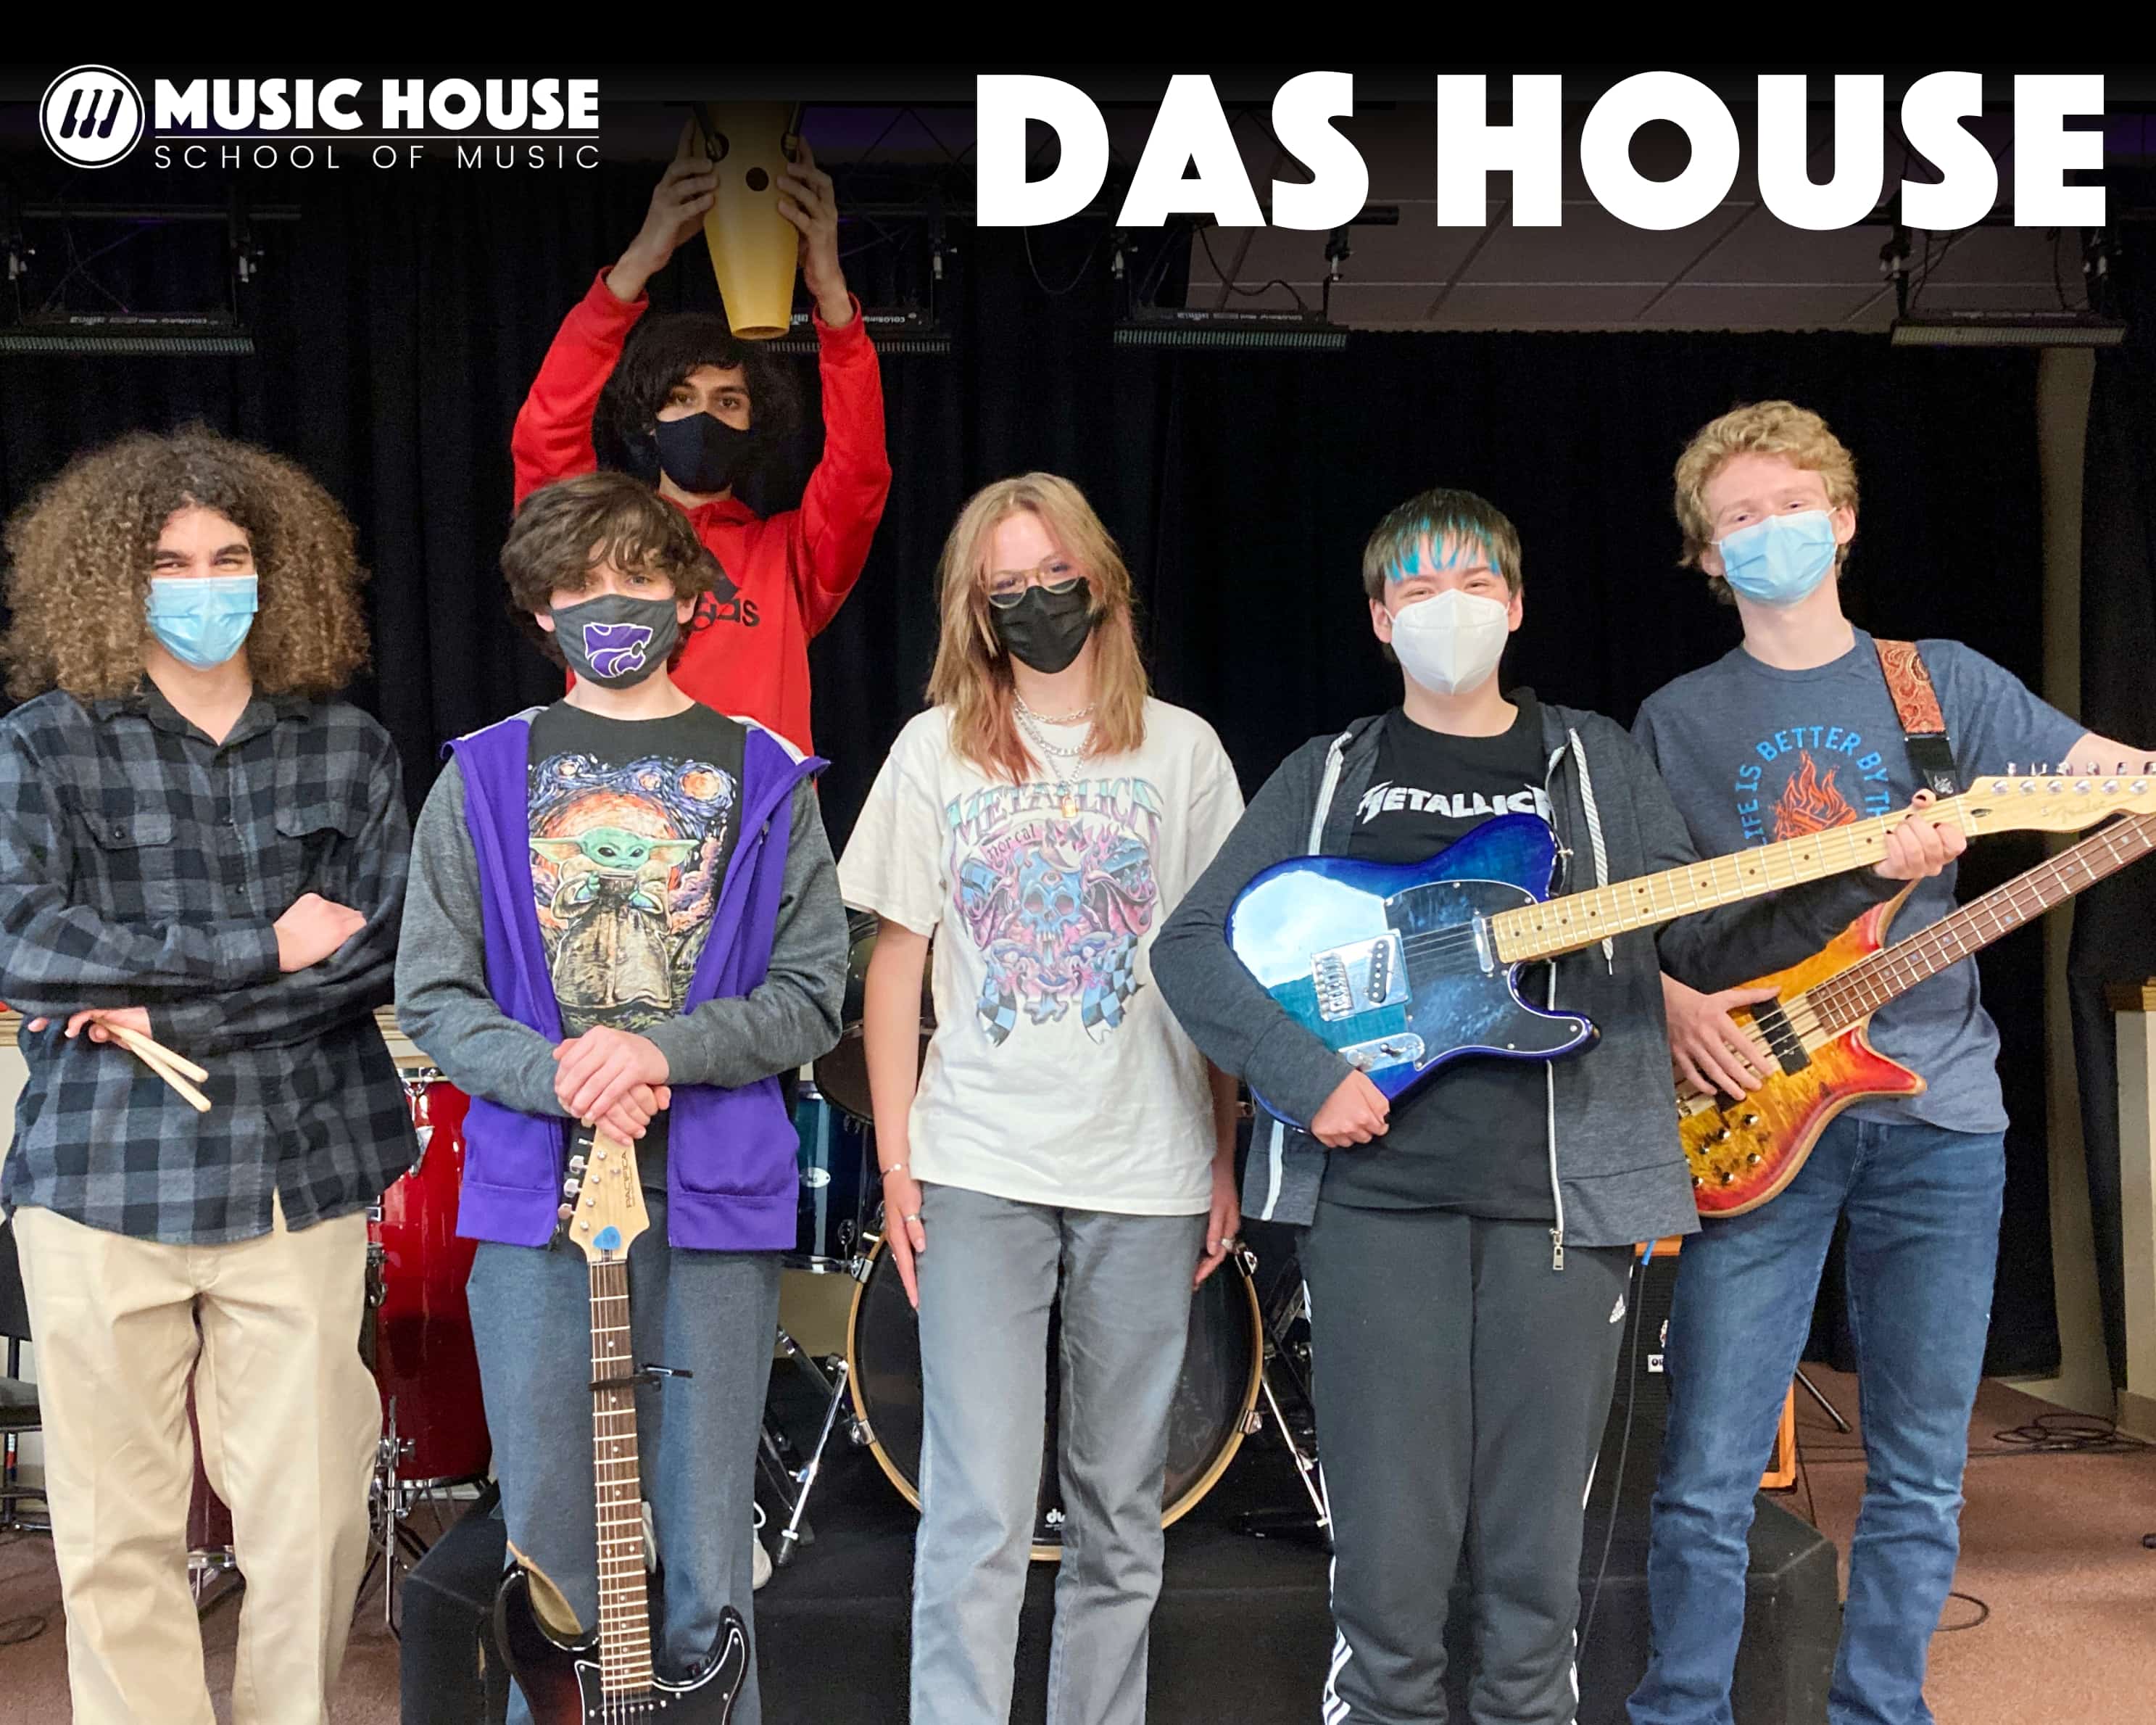 The members of Das House on stage